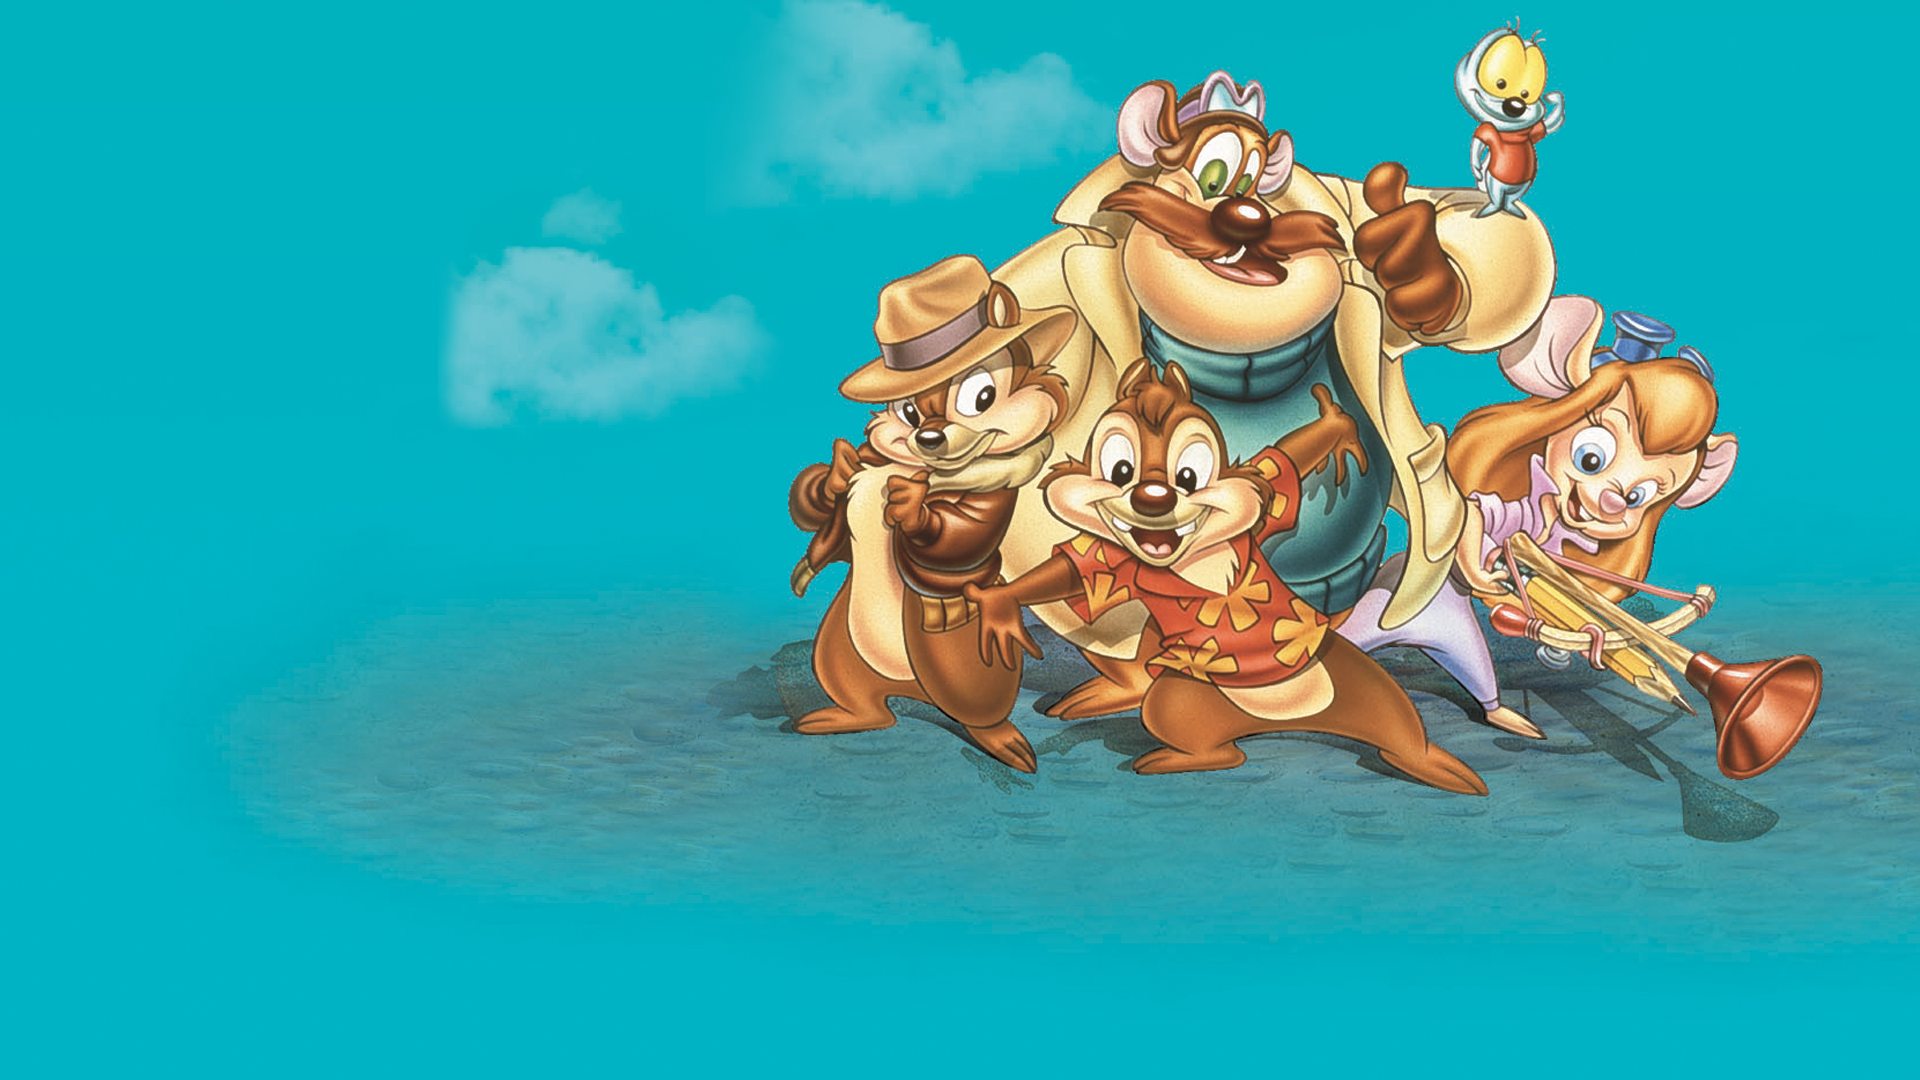 Chip 'n Dale's Rescue Rangers